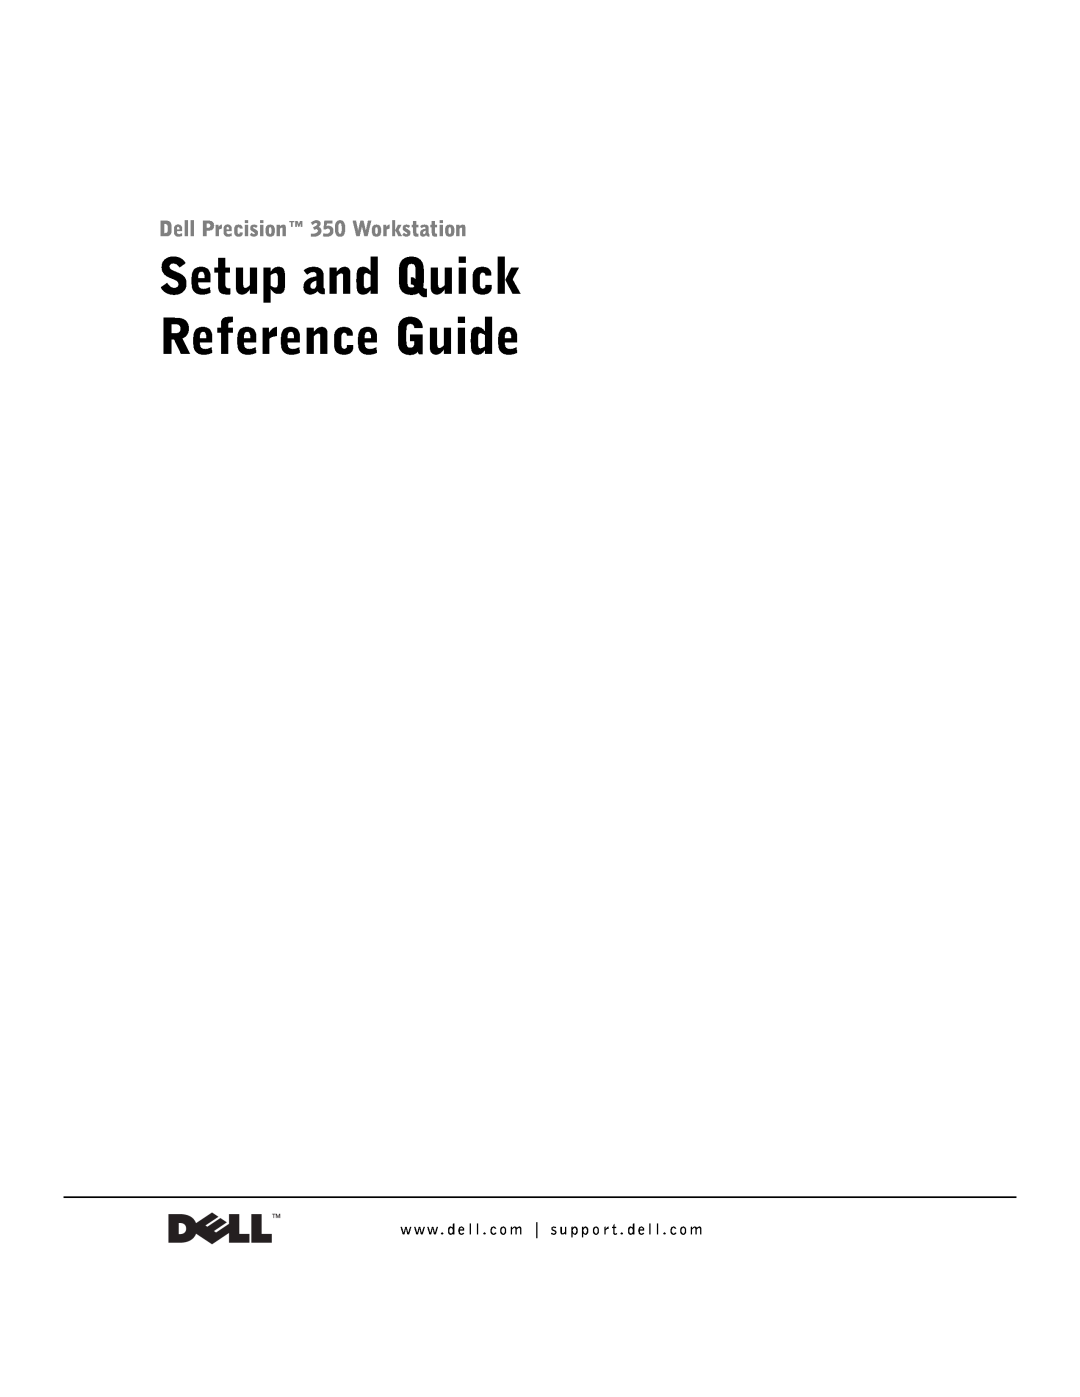 Dell 9T217 manual Setup and Quick Reference Guide, Dell Precision 350 Workstation 